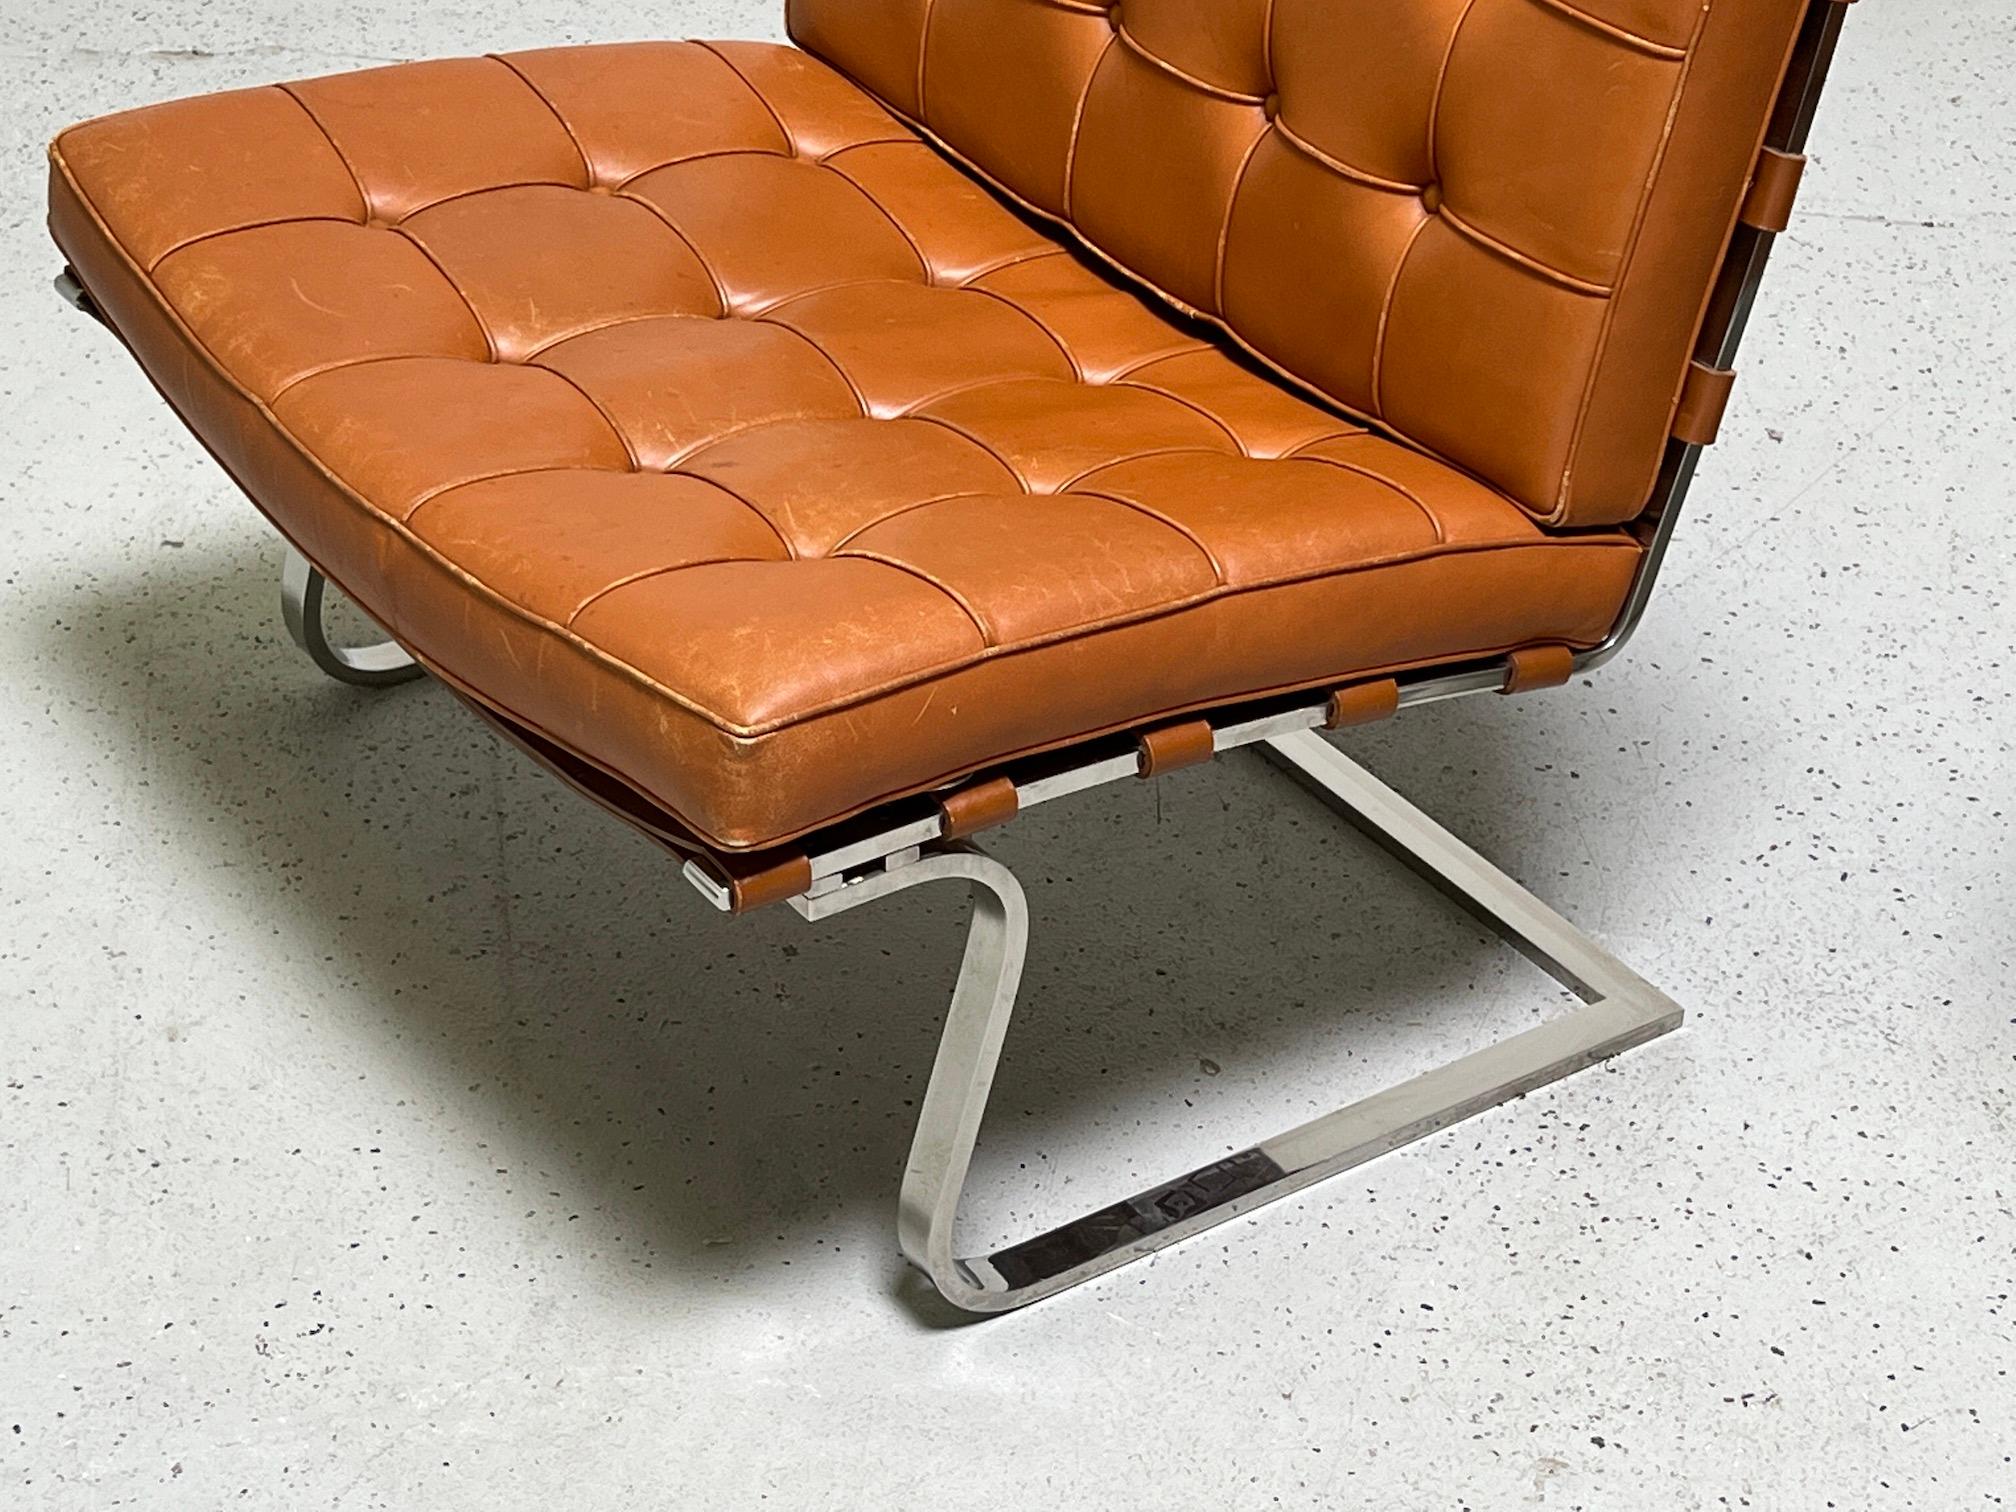 Pair of Tugendhat Chairs by Mies van der Rohe for Knoll 1